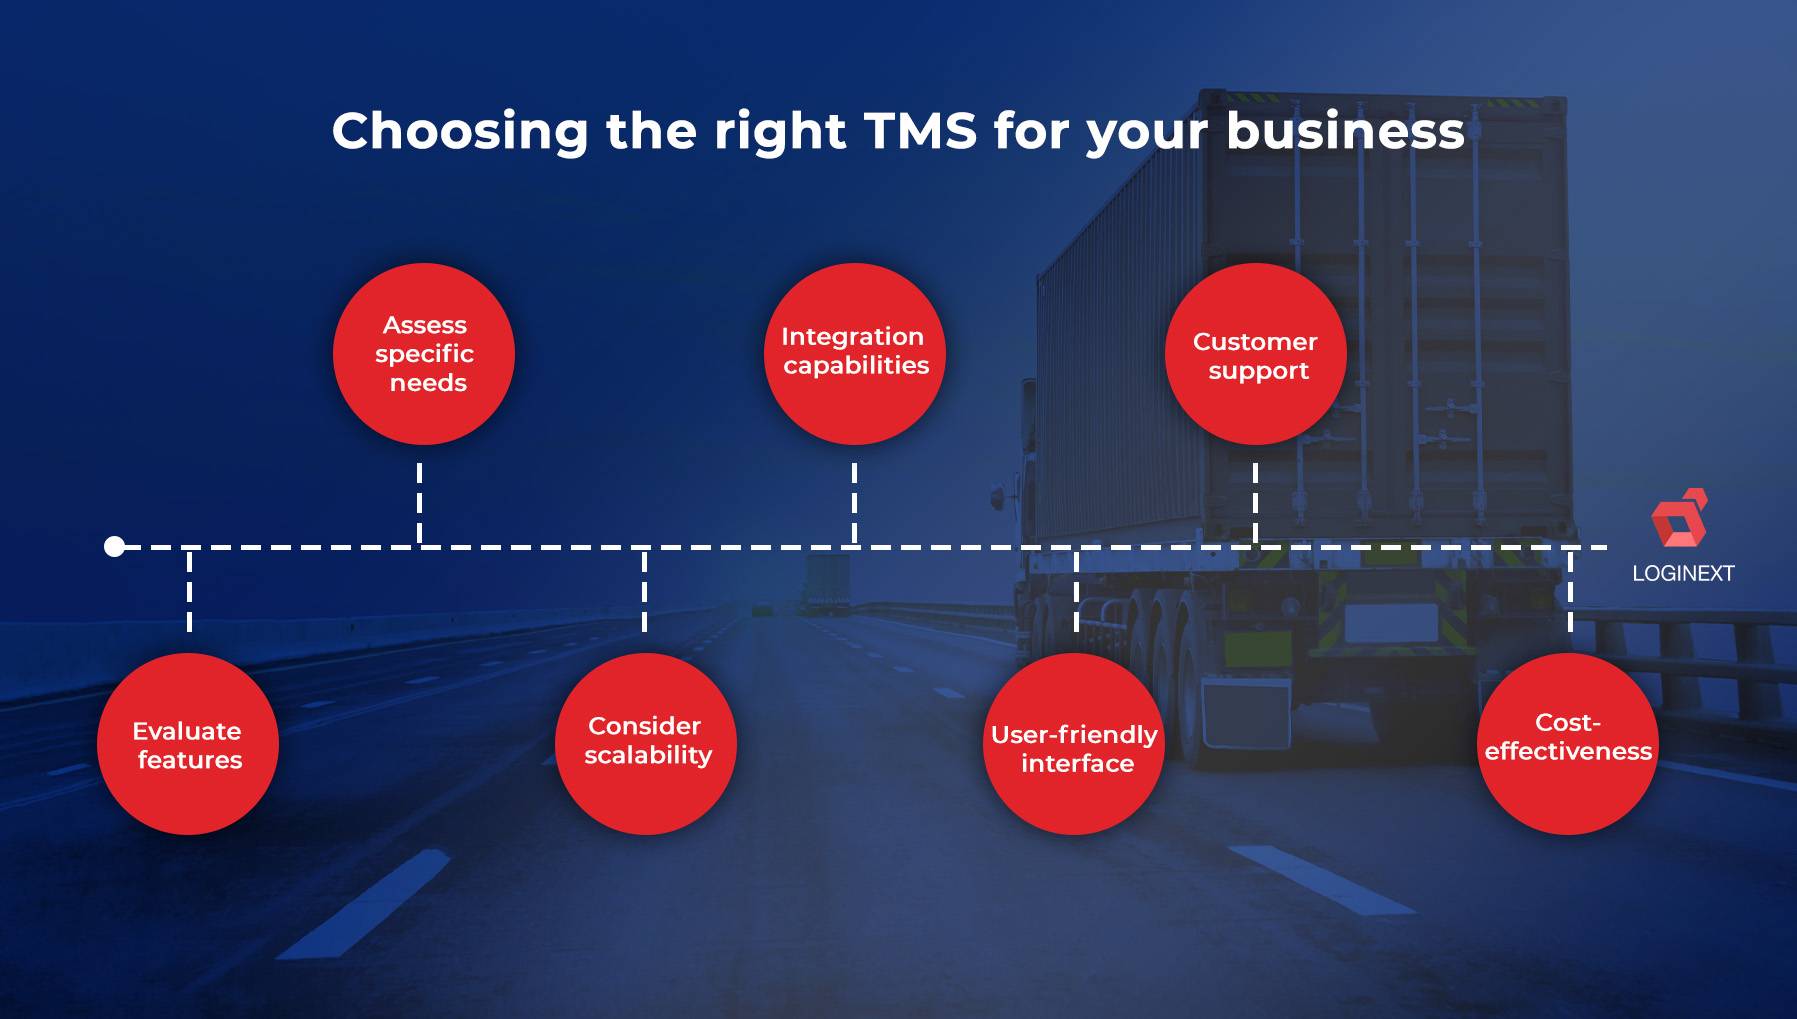 How to Choose the right TMS for your business